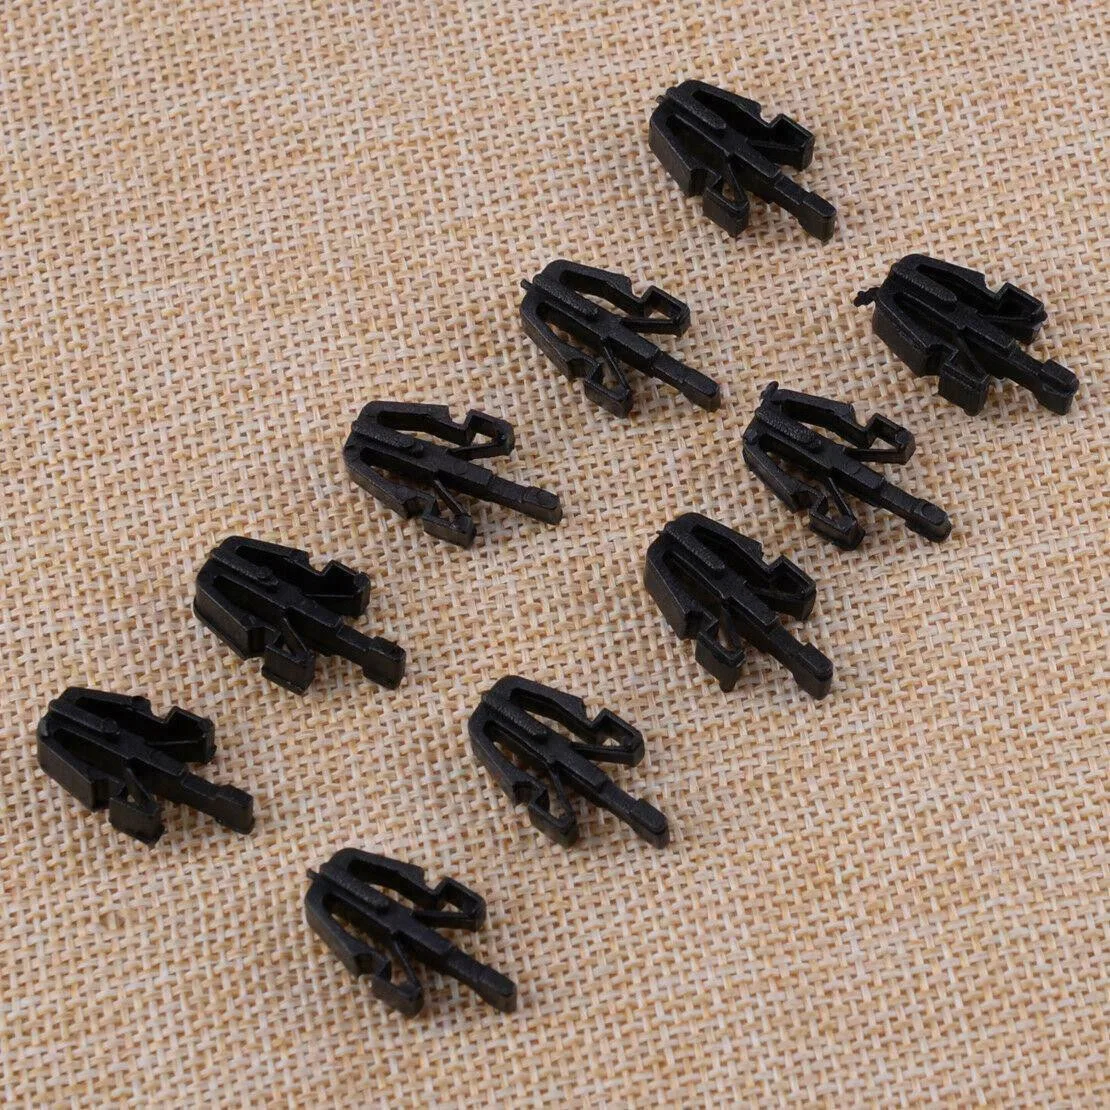 

20 PCS For Chevy Car Grille Retainer Clips Black Plastic For Isuzu Replaces 8942180270 For Mazda Replaces B092-50-715 For Toyota